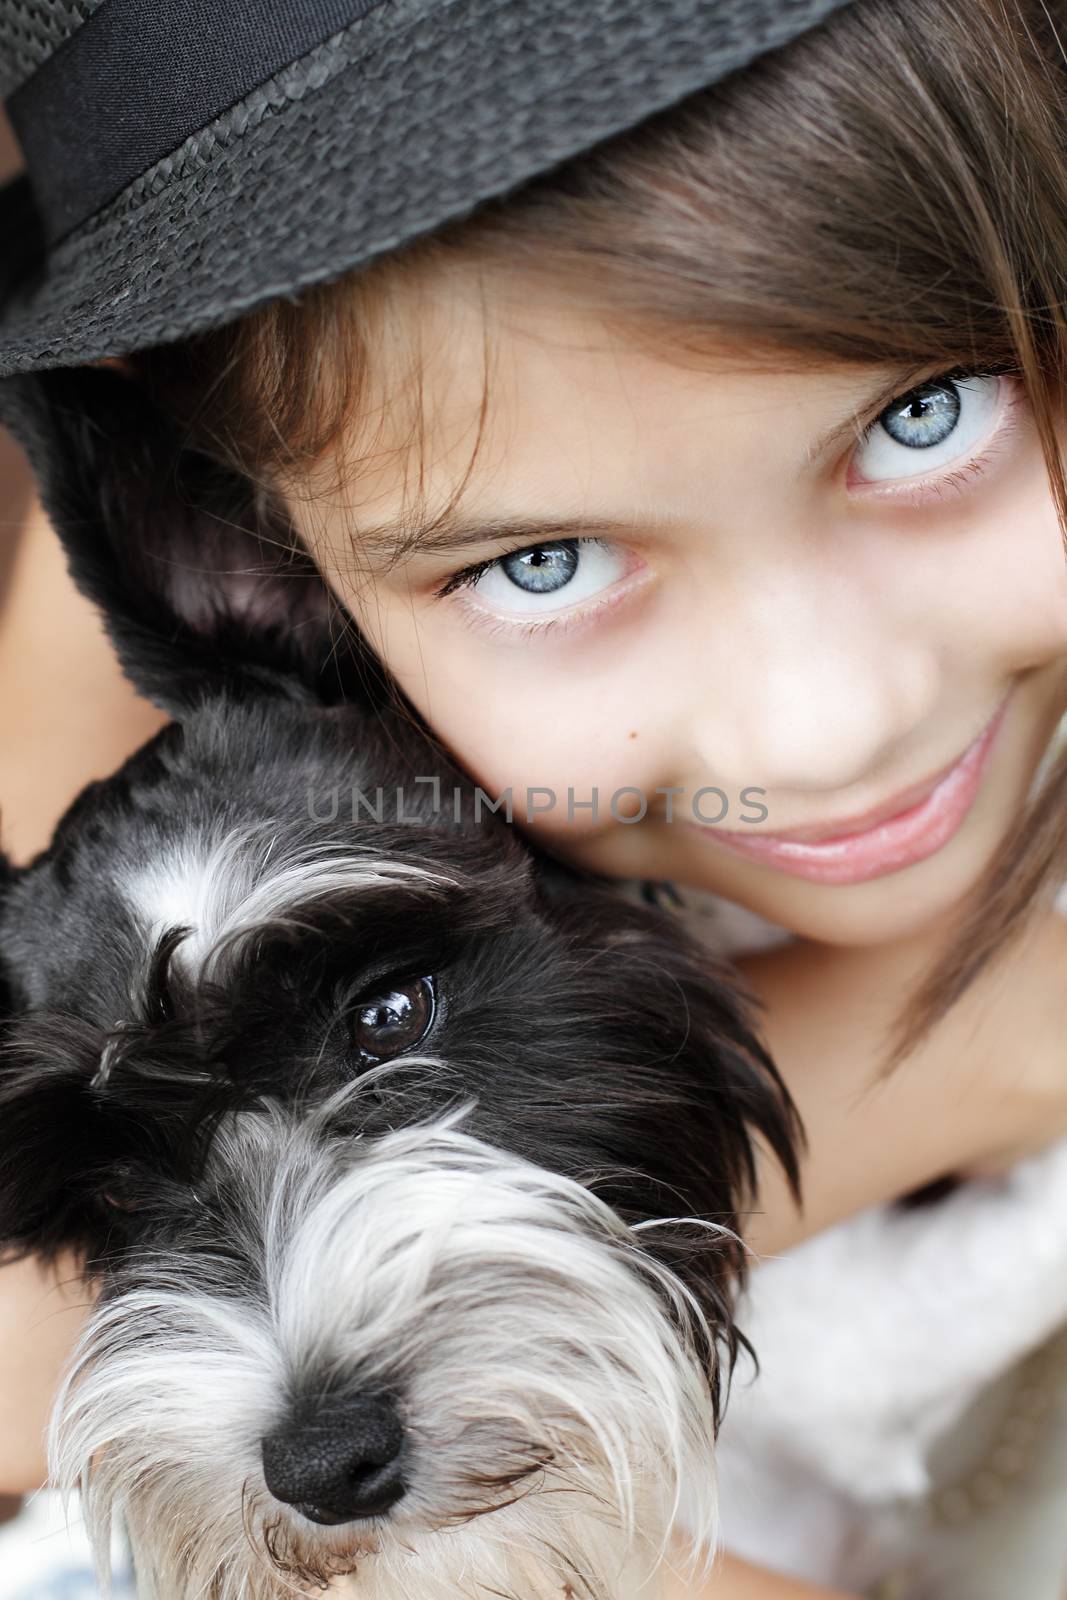 Young girl looking directly into the camera, wearing a fashionable black hat and snuggling her puppy. Extreme shallow depth of field with selective focus on eyes.